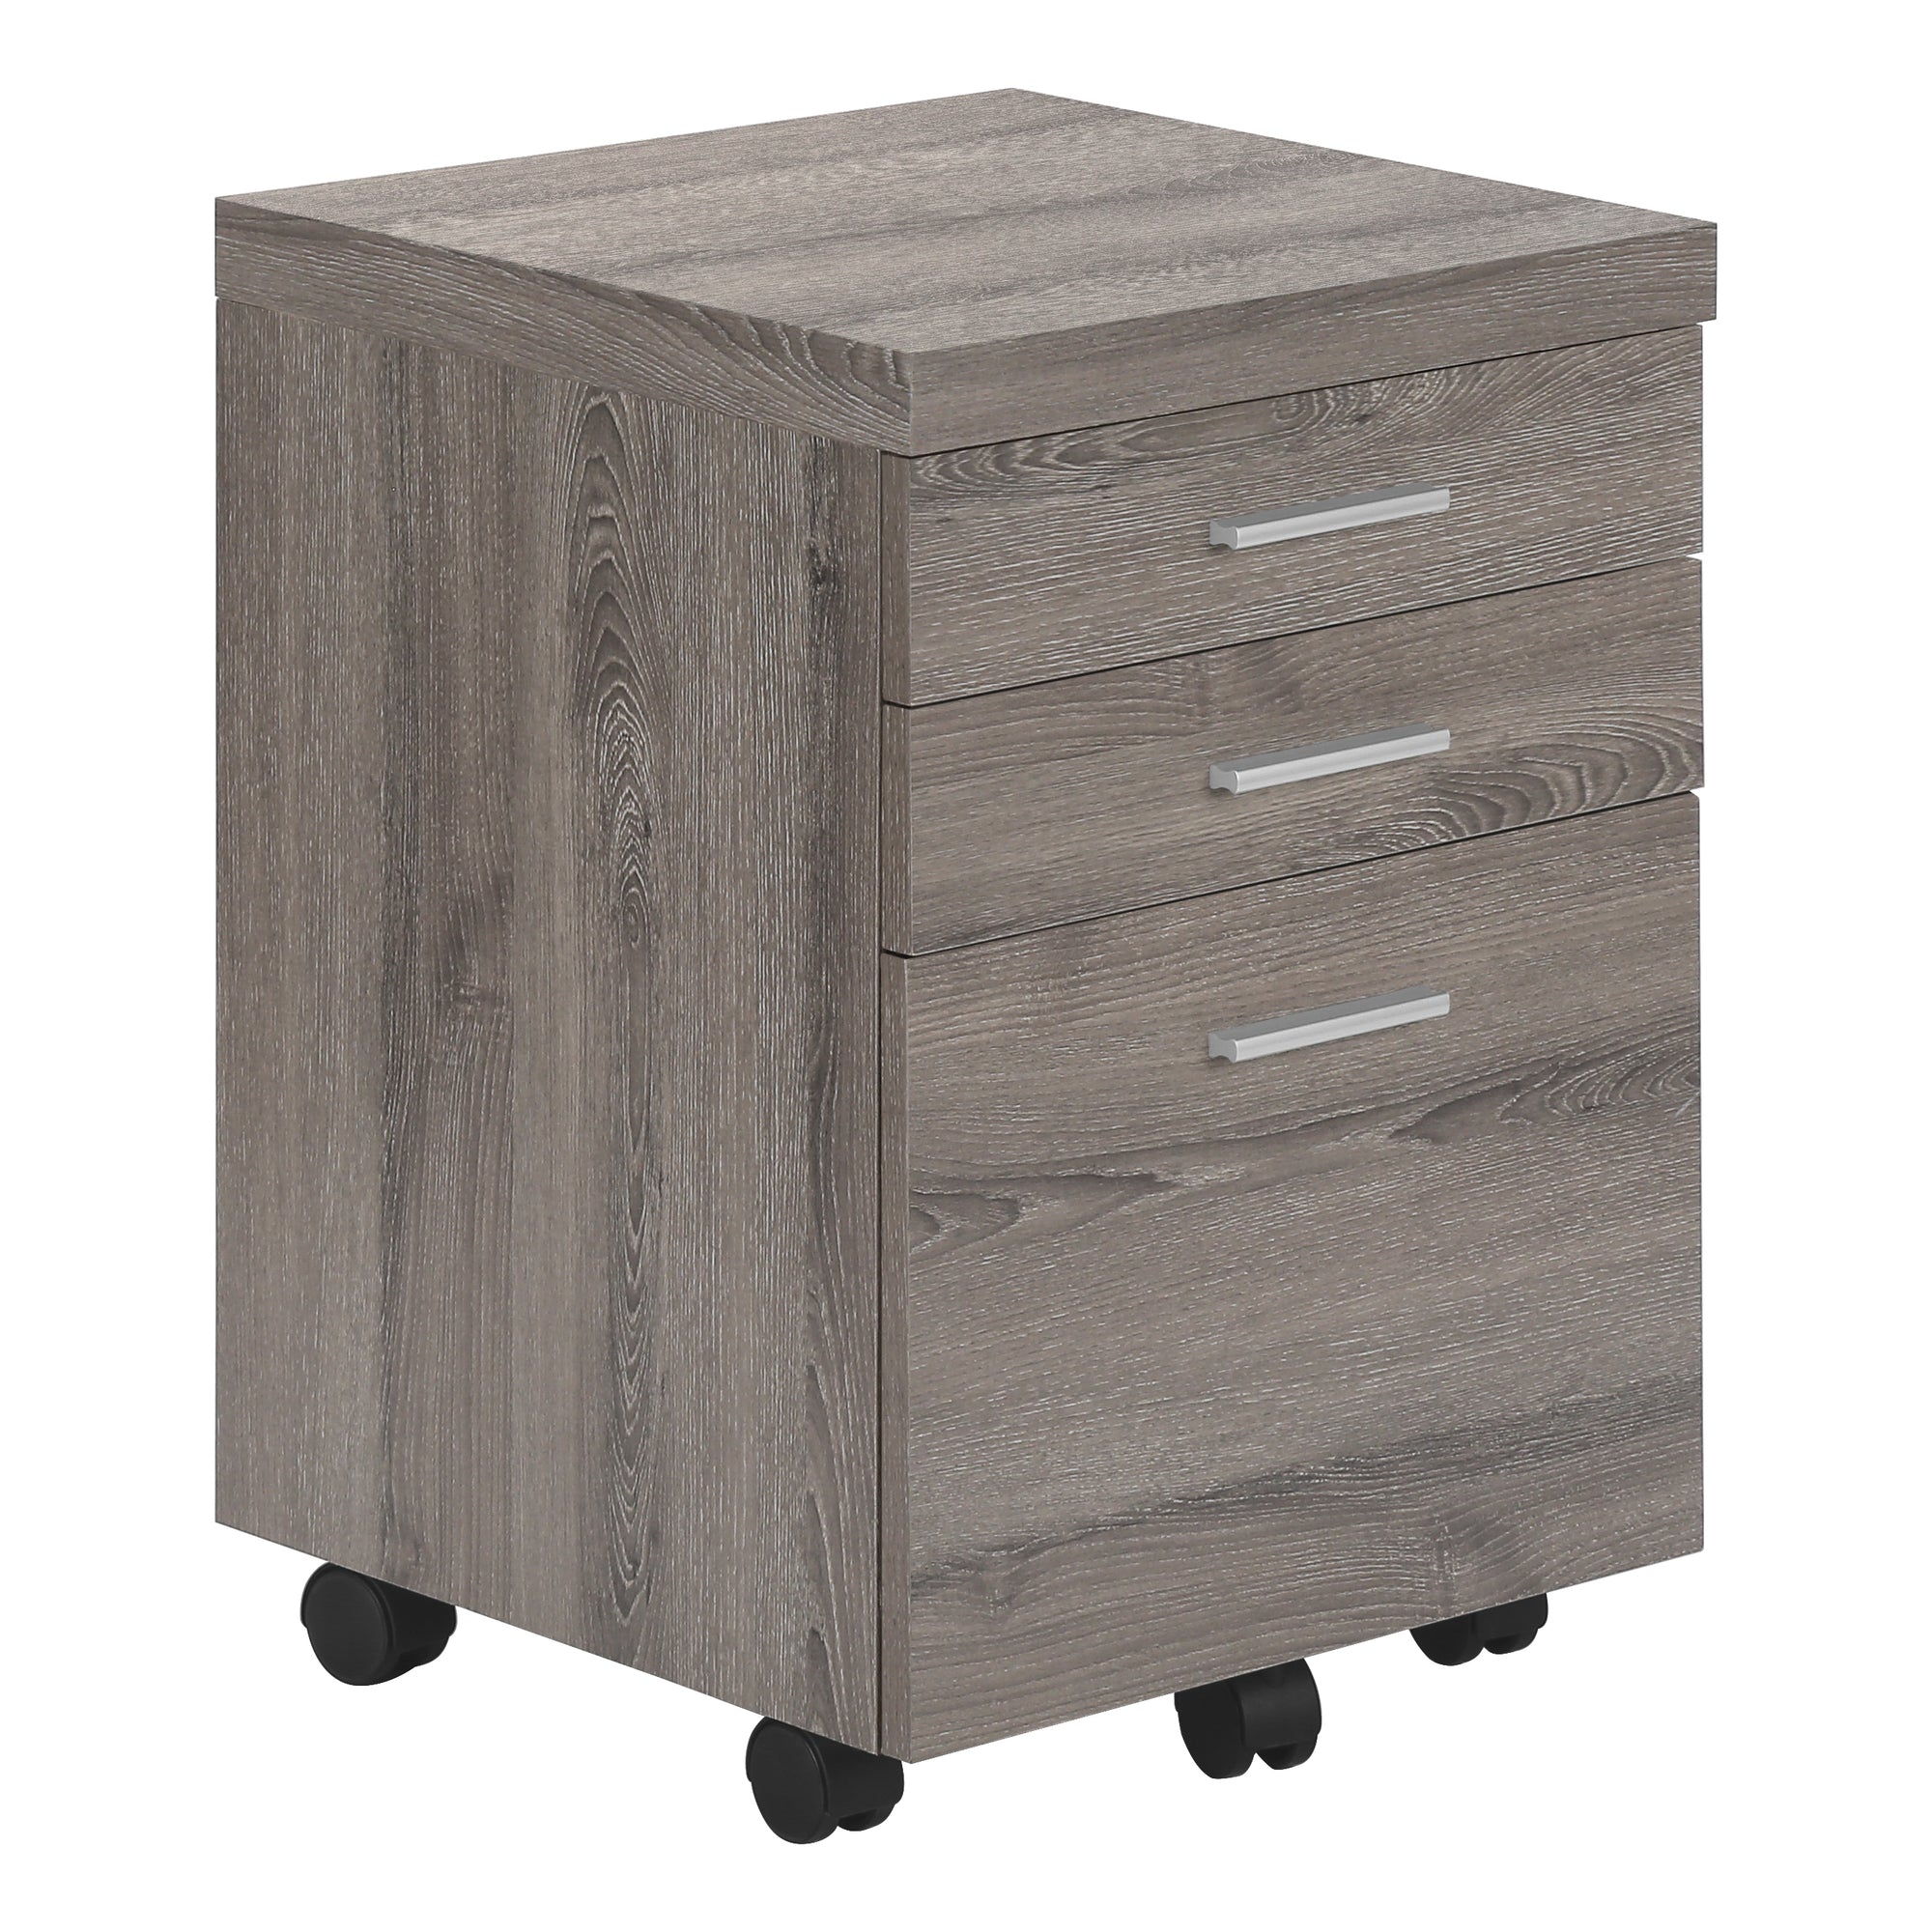 MN-837049    File Cabinet, Rolling Mobile, Storage, Printer Stand, Wood File Cabinet, Office, Mdf, Dark Taupe, Contemporary, Modern